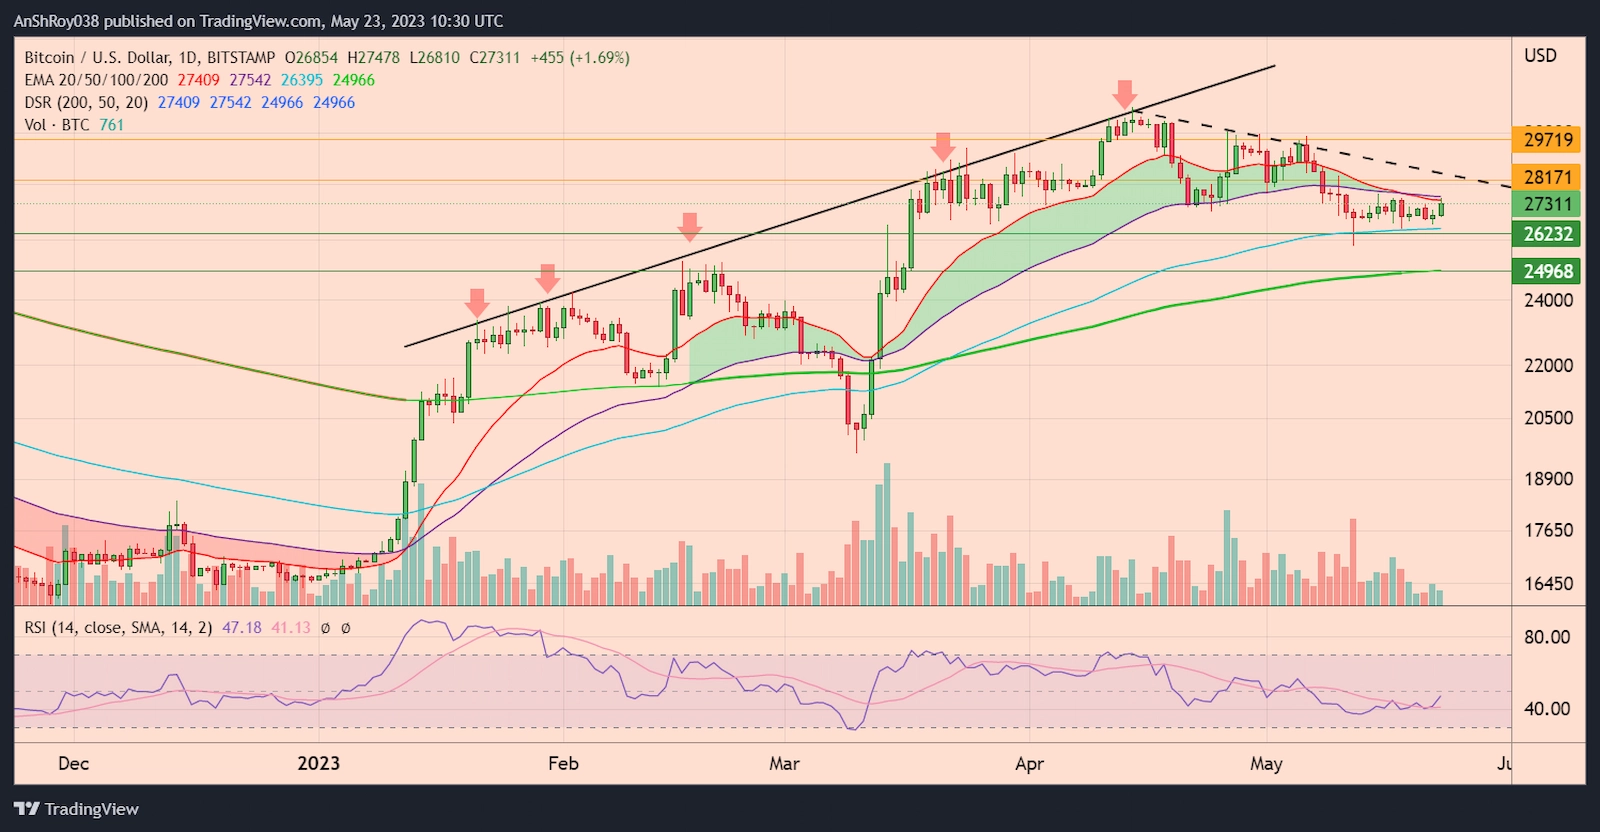 BTCUSD daily chart with RSI